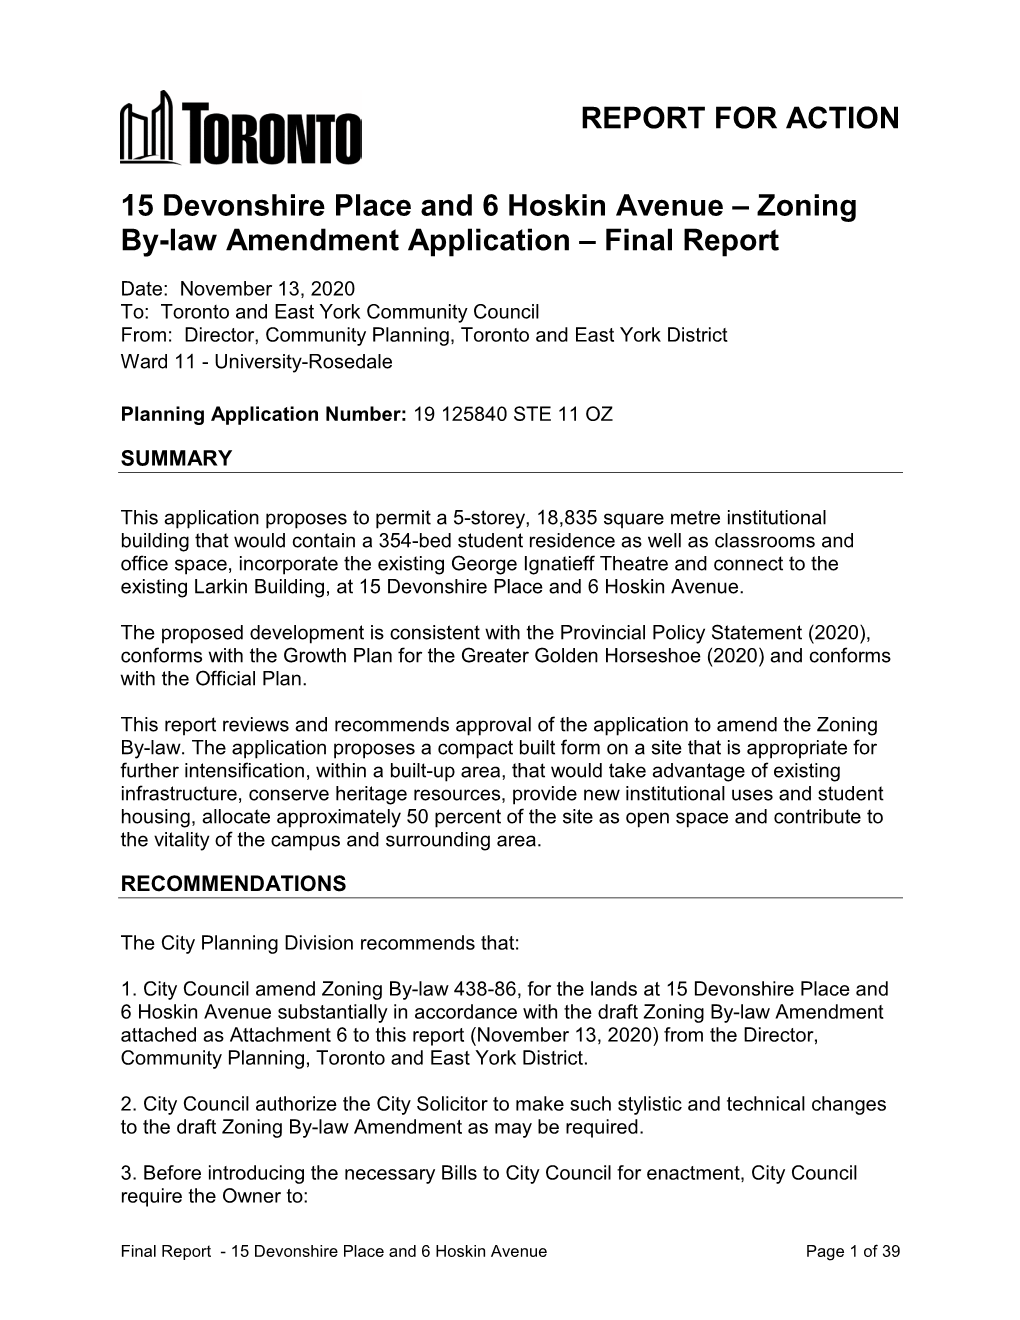 15 Devonshire Place and 6 Hoskin Avenue – Zoning By-Law Amendment Application – Final Report